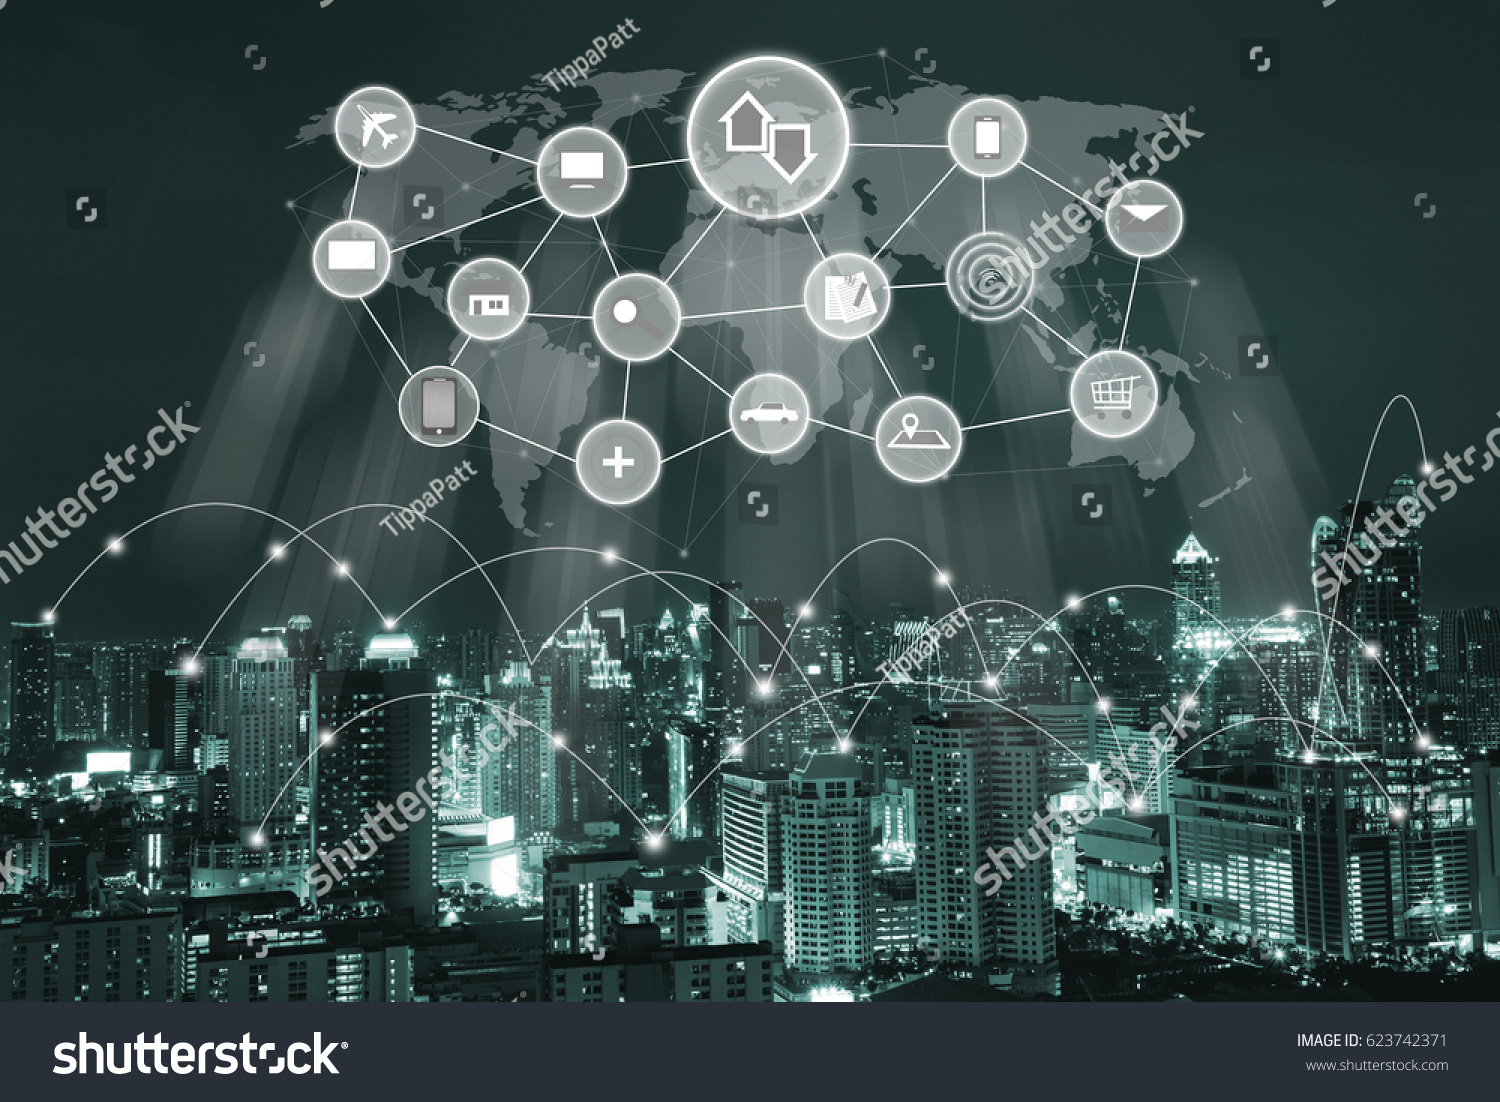 Modern buildings with wifi icons connection, globalization network communication in smart city, internet of things IoT concept #623742371